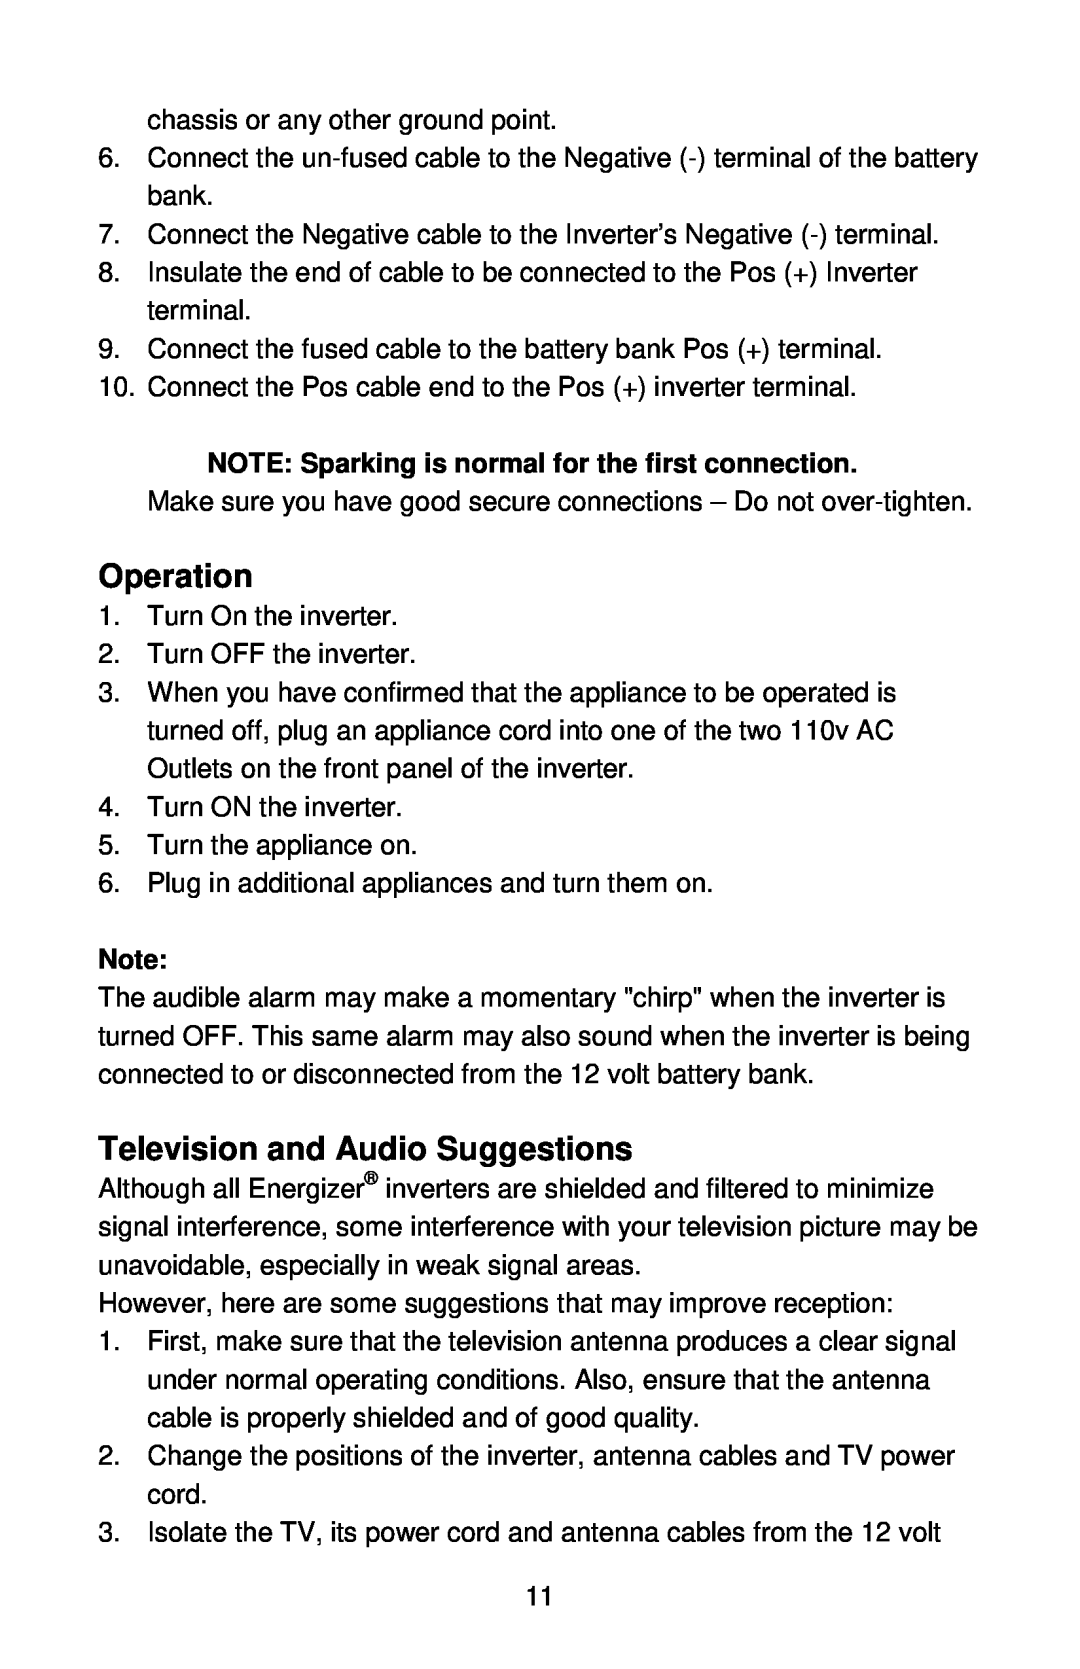 Energizer EN1100 manual Operation, Television and Audio Suggestions, NOTE Sparking is normal for the first connection 